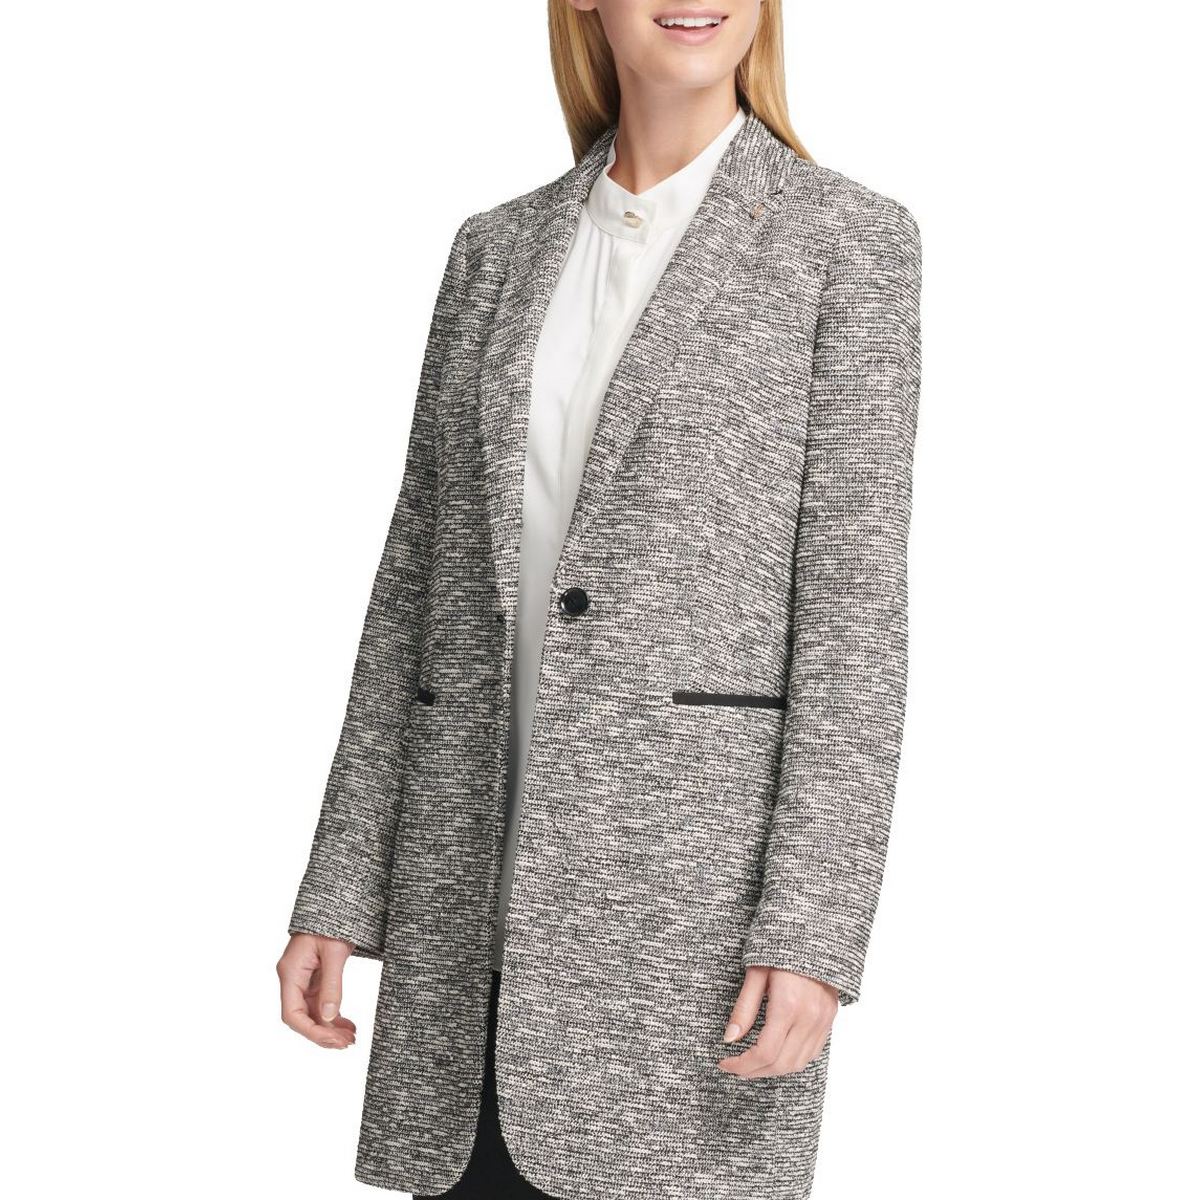 TOMMY HILFIGER Women's Marled Knit Patched One Button Blazer Jacket Top ...